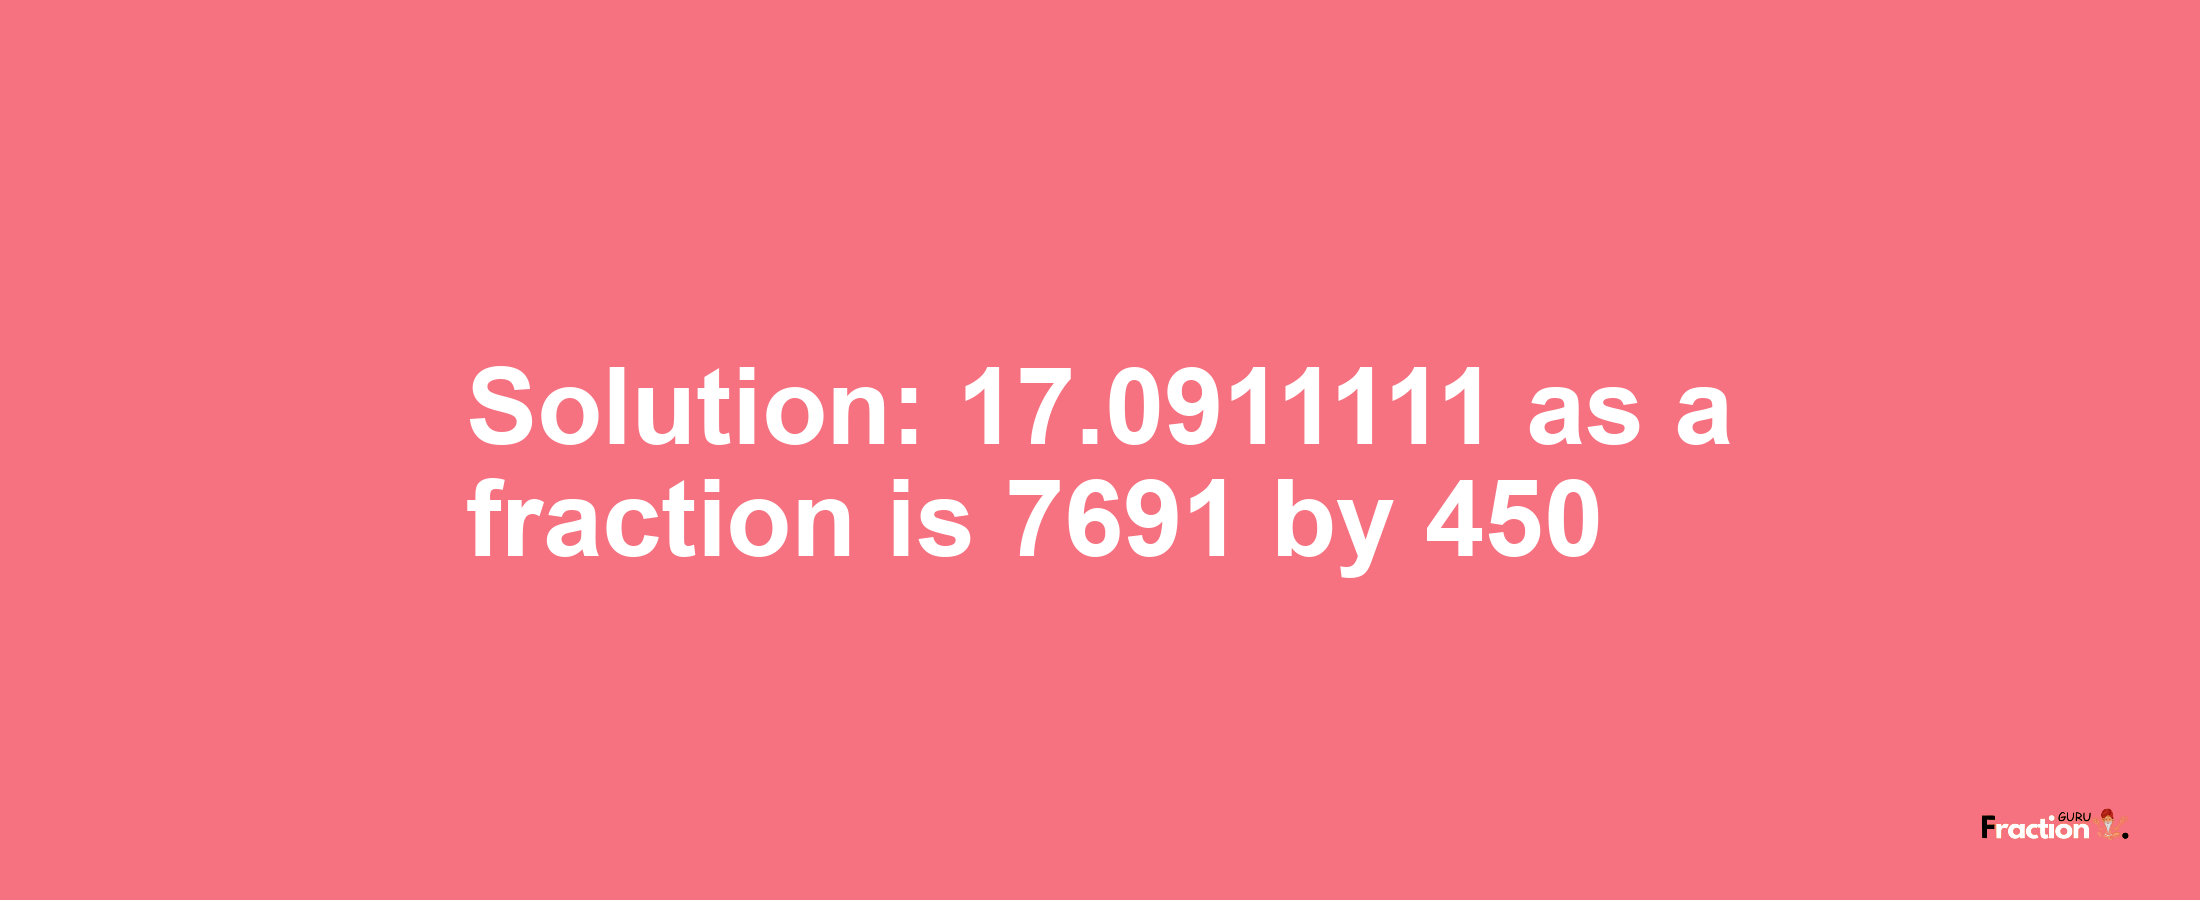 Solution:17.0911111 as a fraction is 7691/450